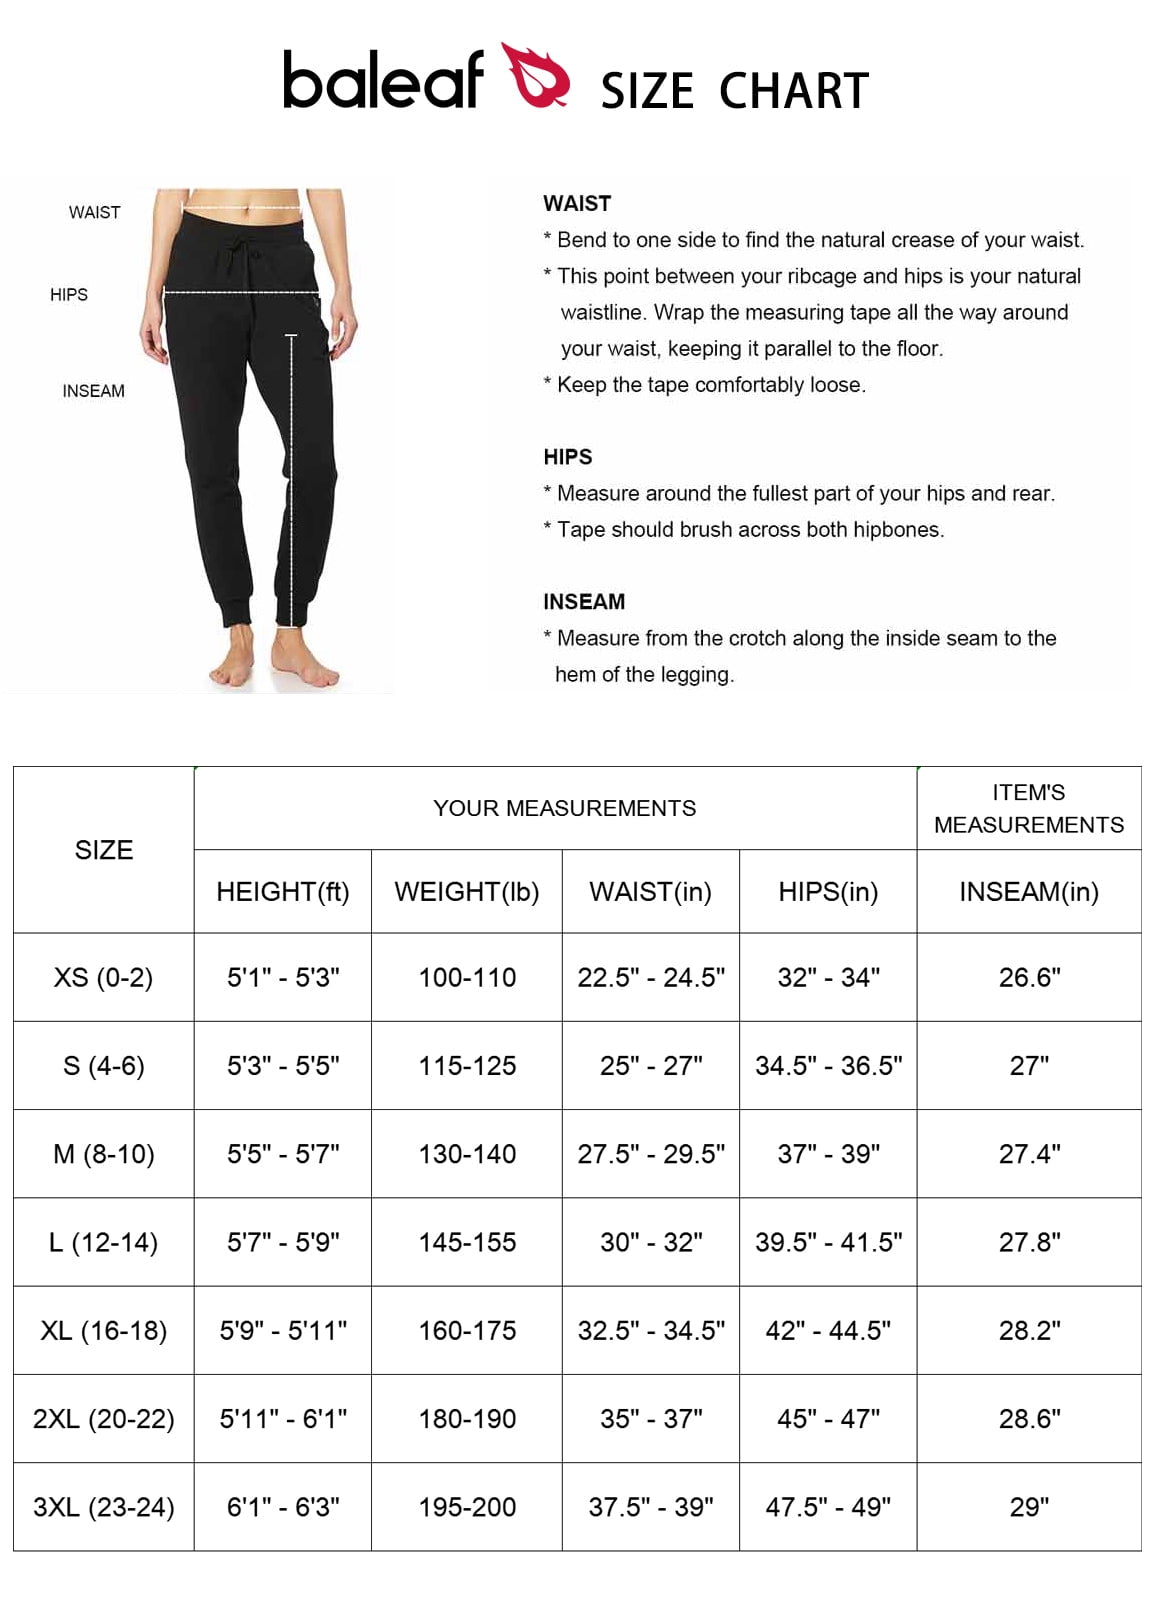 BALEAF Women's Sweatpants Joggers Cotton Yoga Lounge Sweat Pants Casual  Running Tapered Pants with Pockets Light Gray Size S 